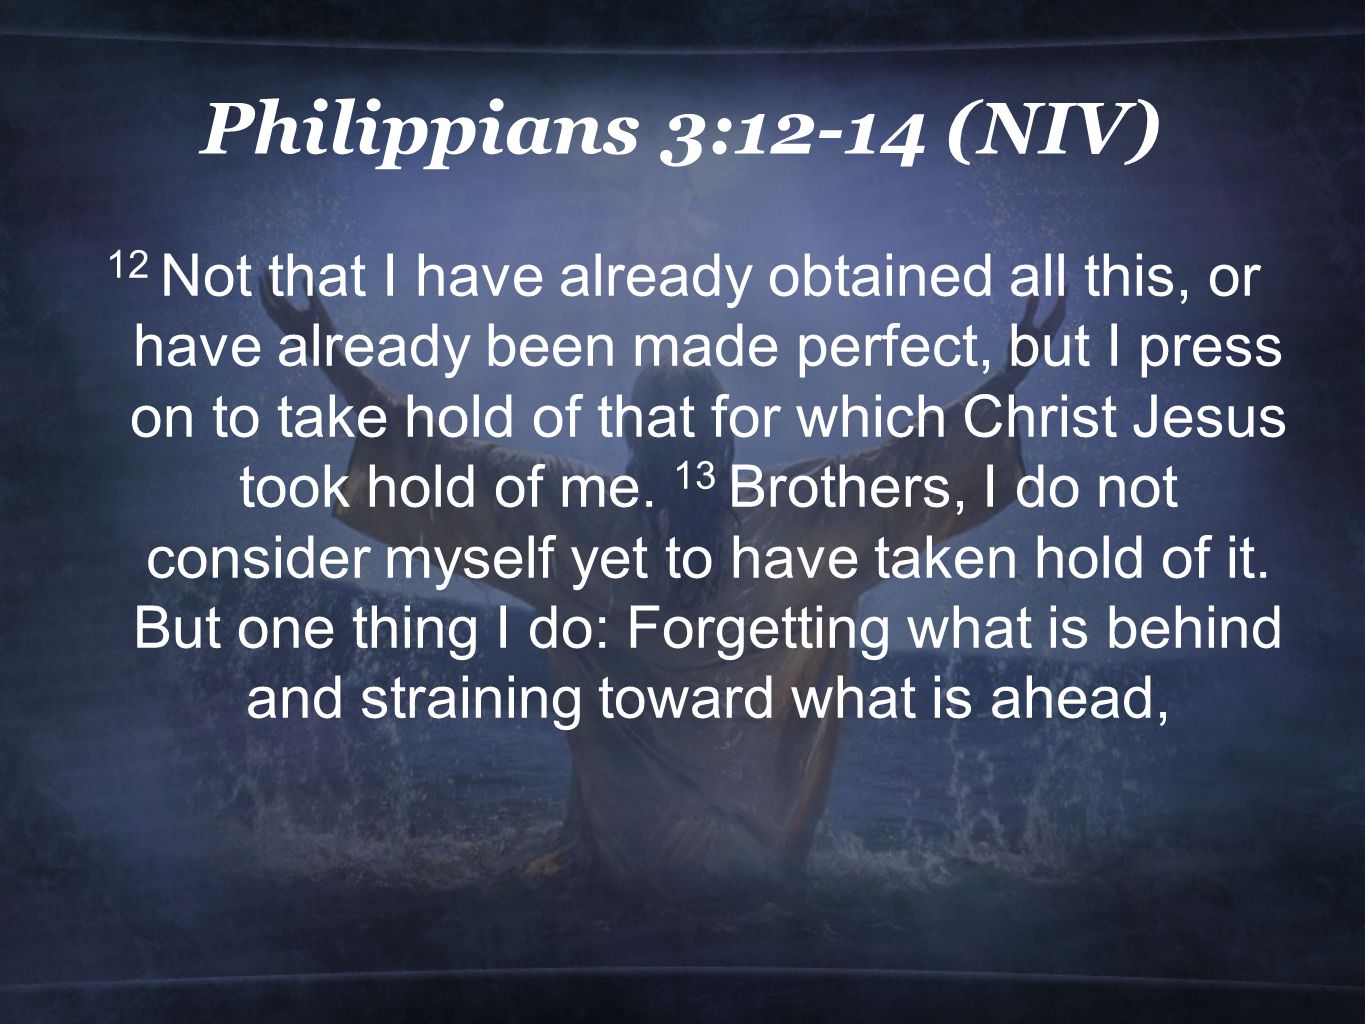 Philippians 3:12-14 (NIV) 12 Not that I have already obtained all this, or have already been made perfect, but I press on to take hold of that for which Christ Jesus took hold of me.